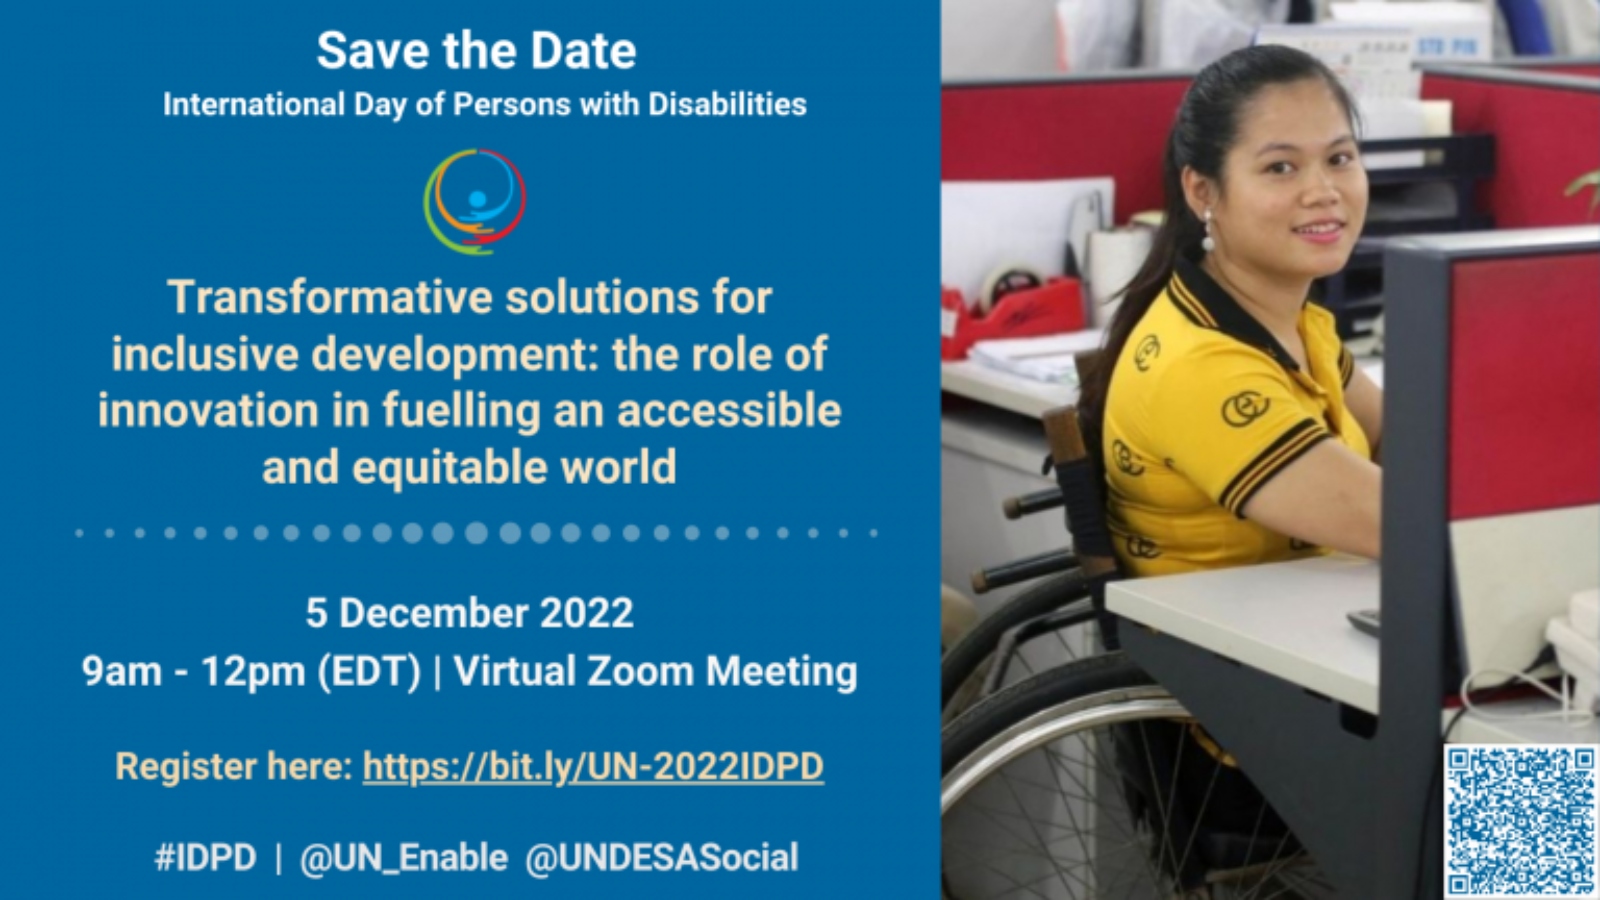 International Day of Persons with Disabilities (IDPD) 2022